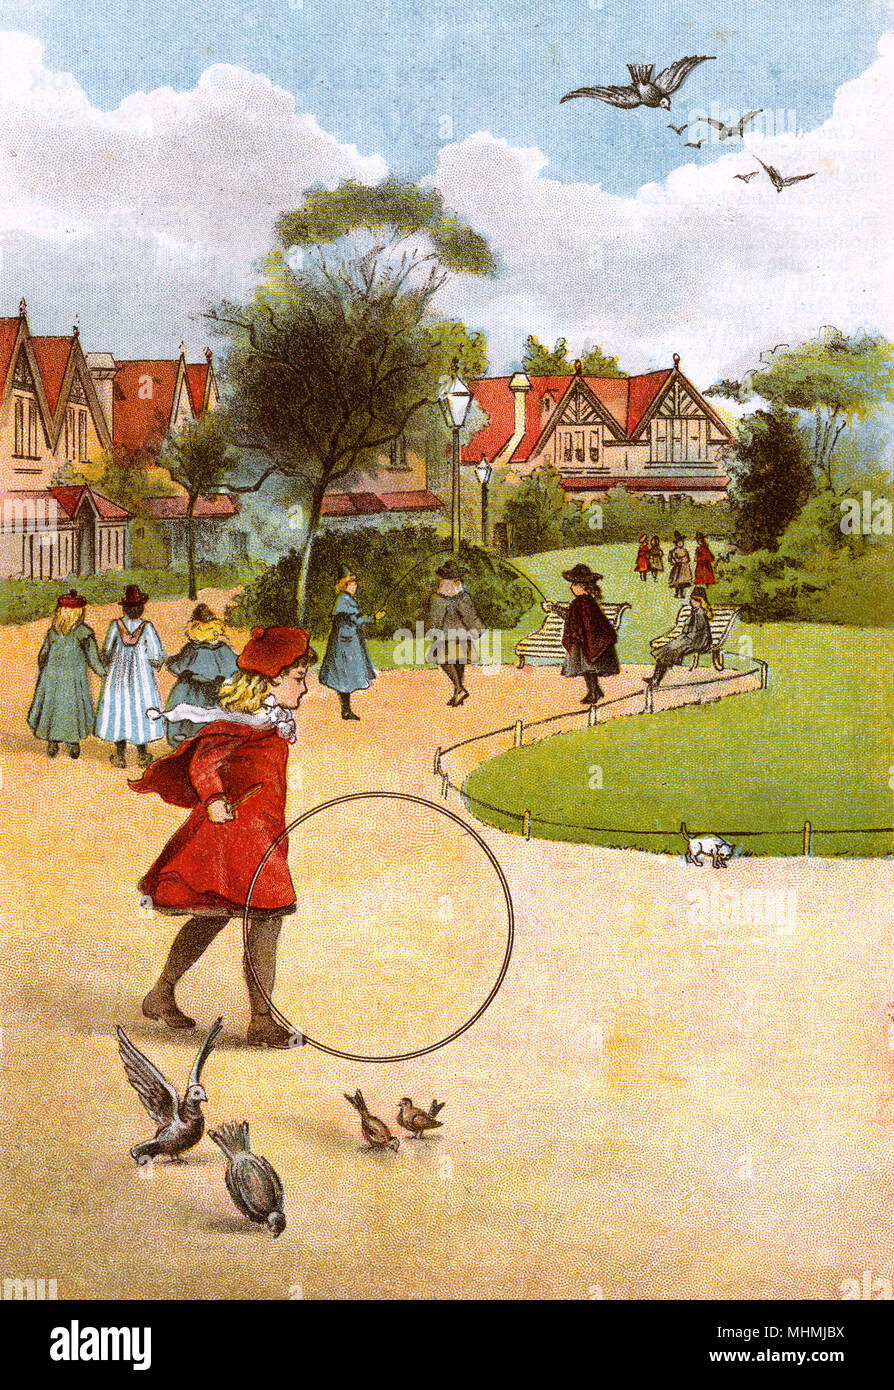 JOUETS/HOOPS/C19TH Banque D'Images